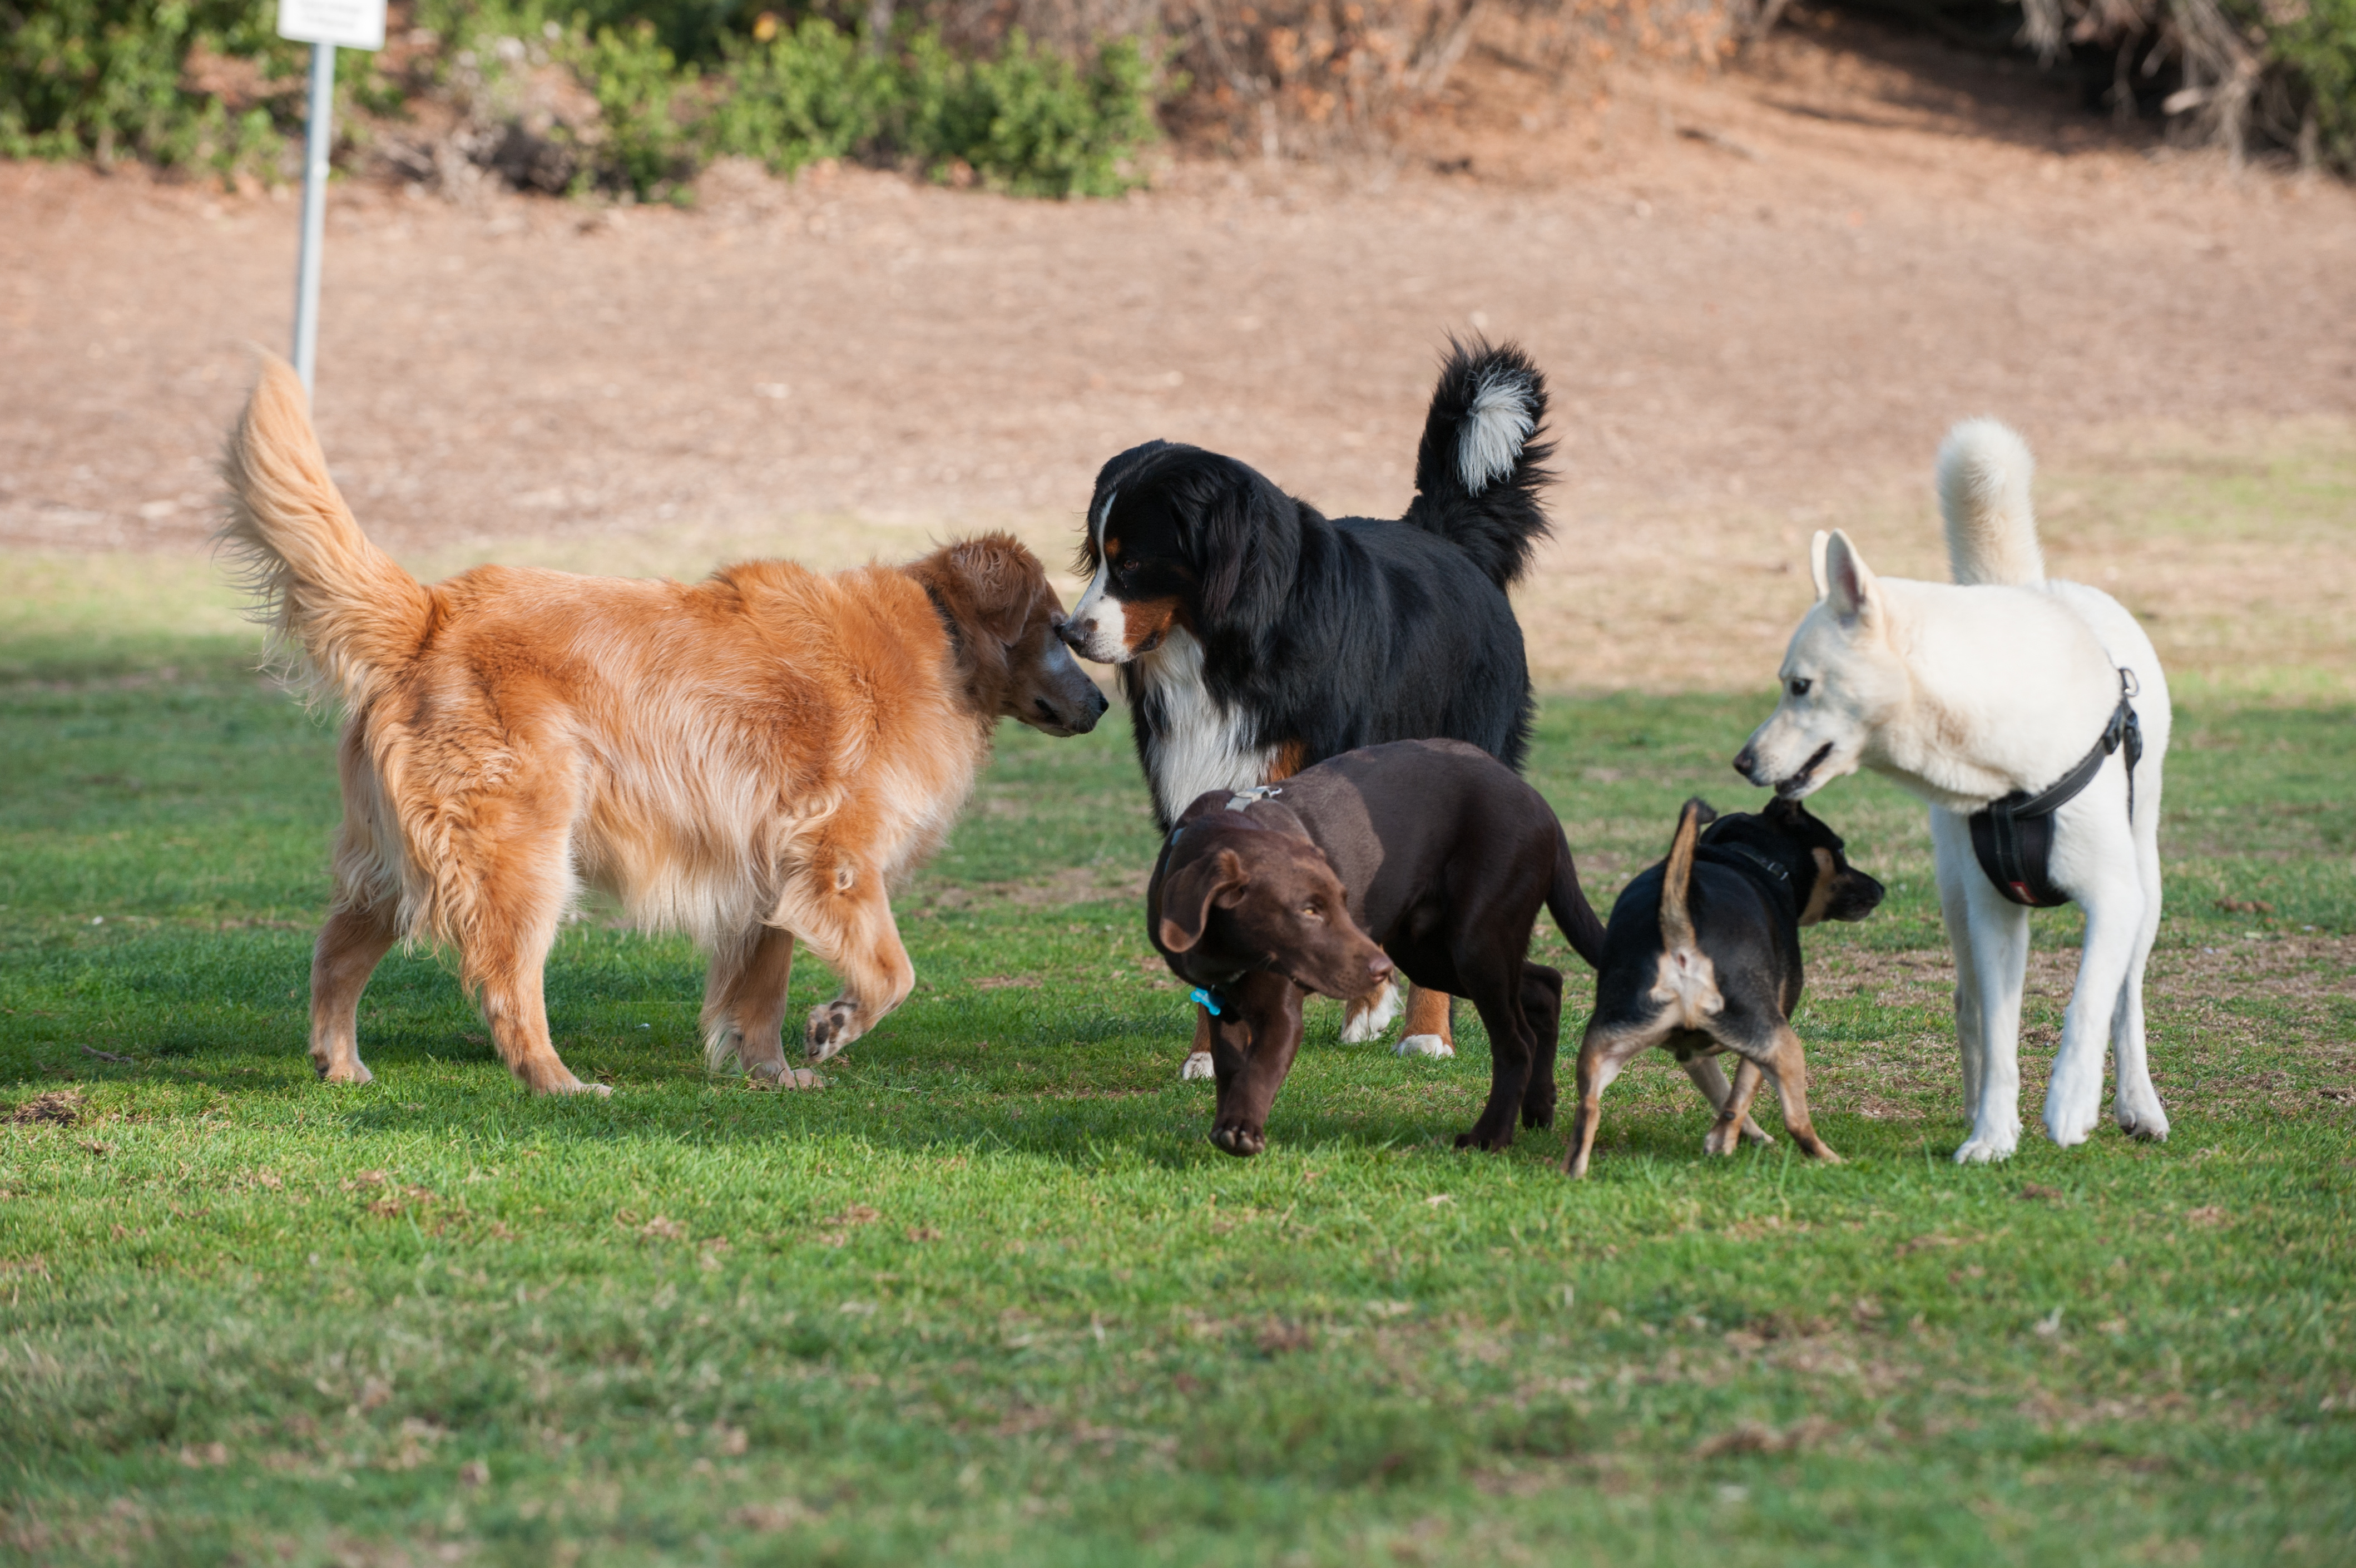 Group of dogs at park smelling each other.